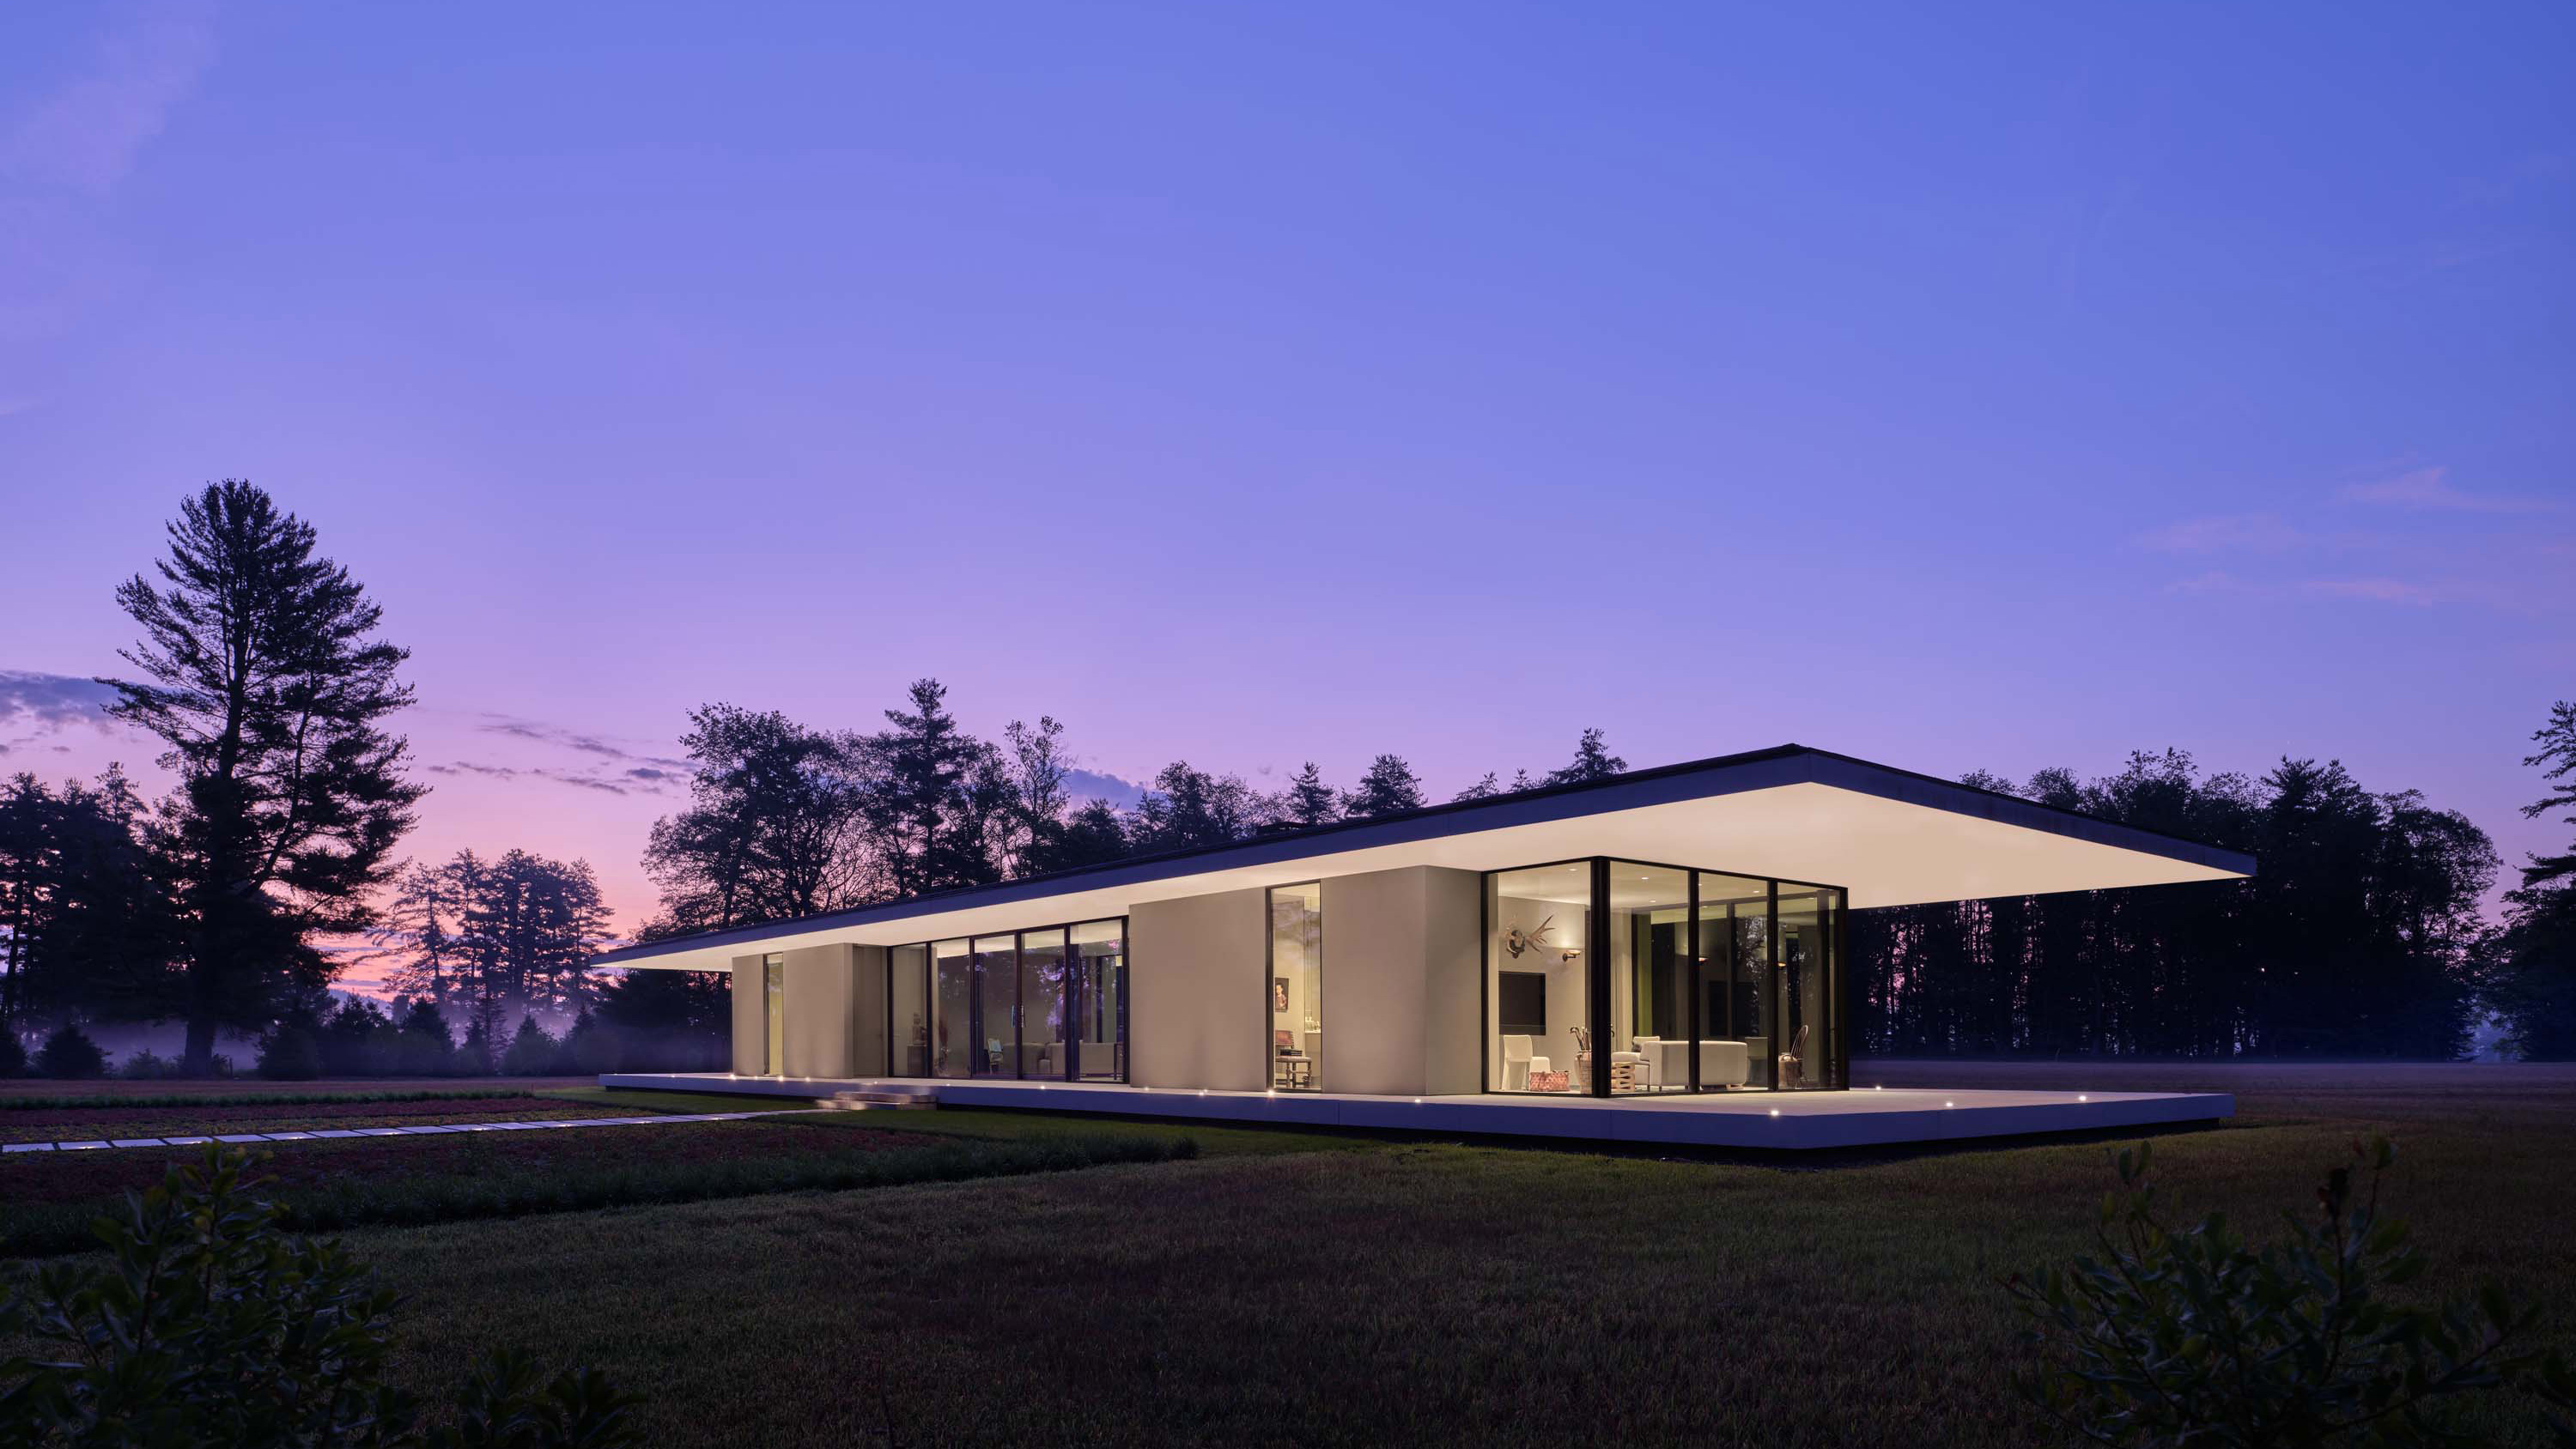 Exterior photo of the Casa Annunziata Residence by Specht Novak Architects. Shot at dusk by Dror Baldinger, featuring a Diagonal view of the symmetrical single-story pavilion with a thin floating roof that cantilevers 15’ from the perimeter walls, in perfect harmony with its natural surroundings.